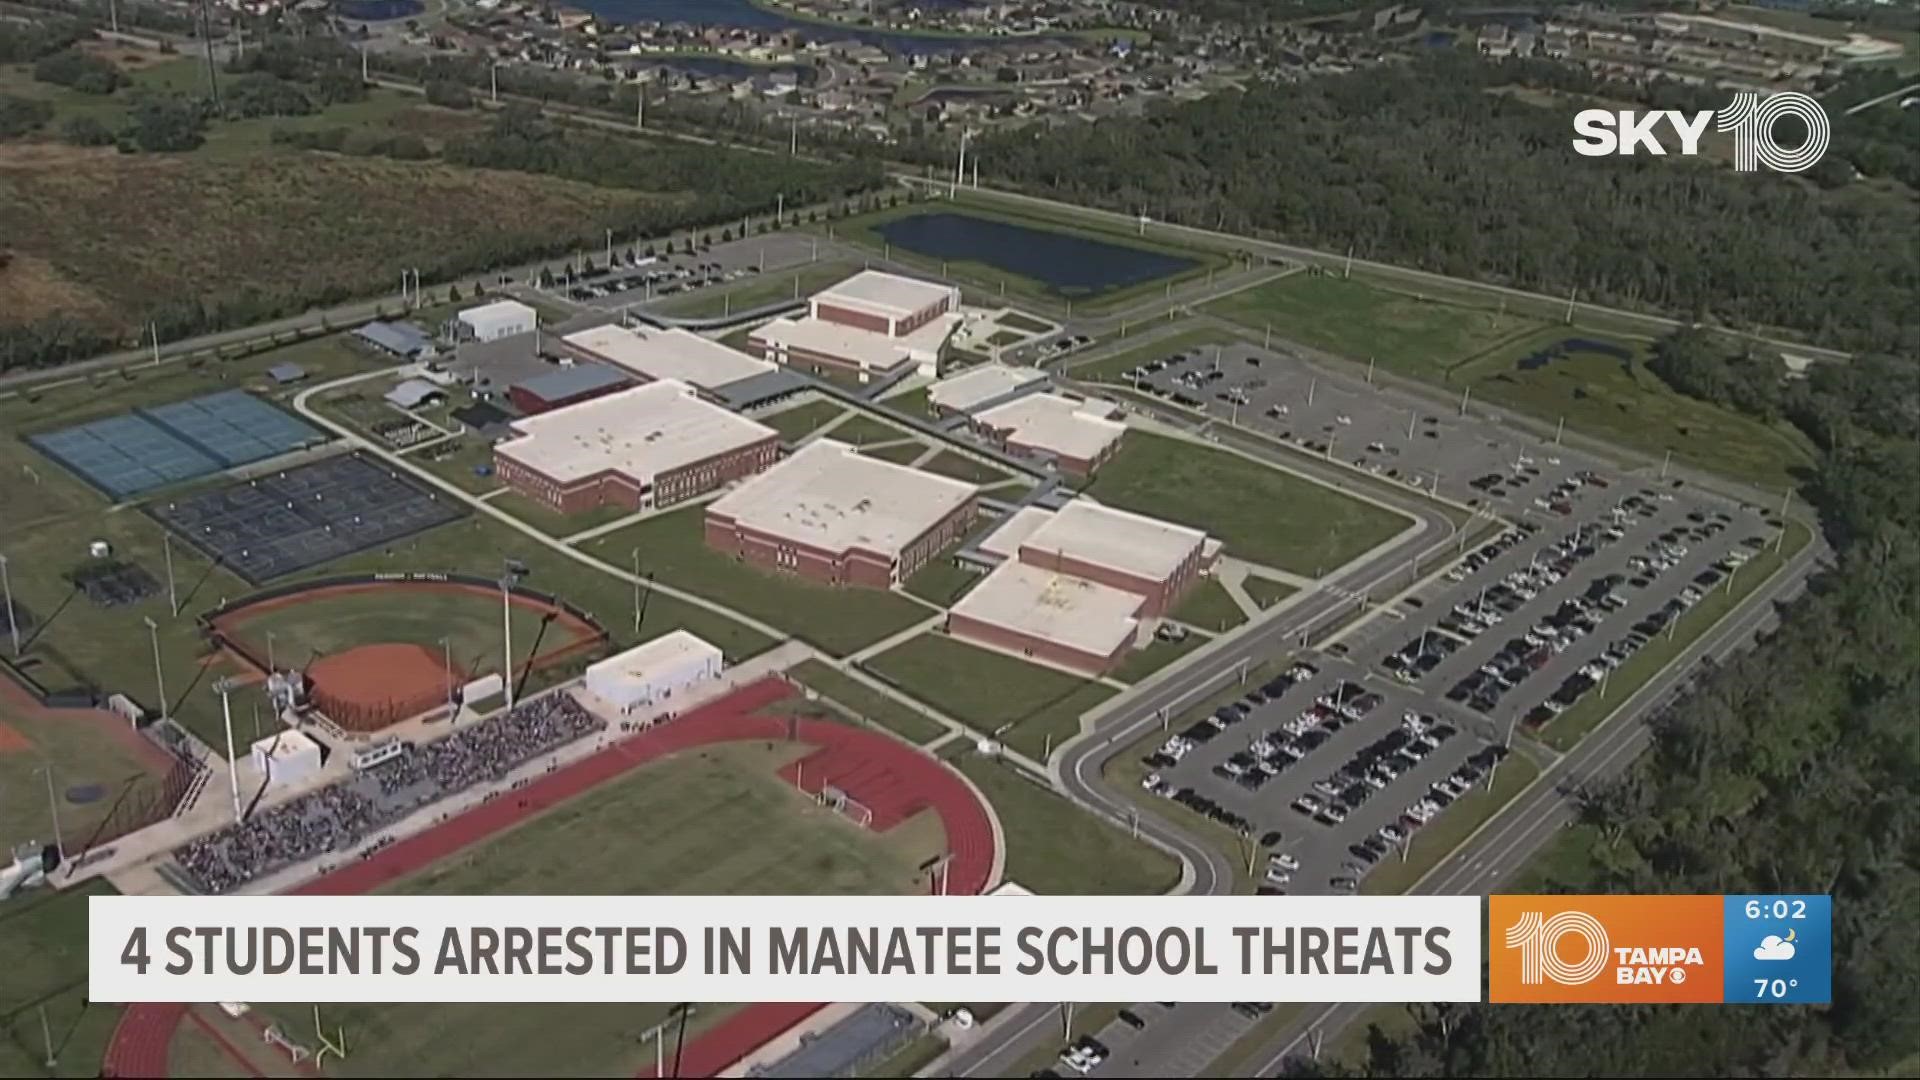 Detectives said this is the fourth student arrested over the span of two days for making school threats.